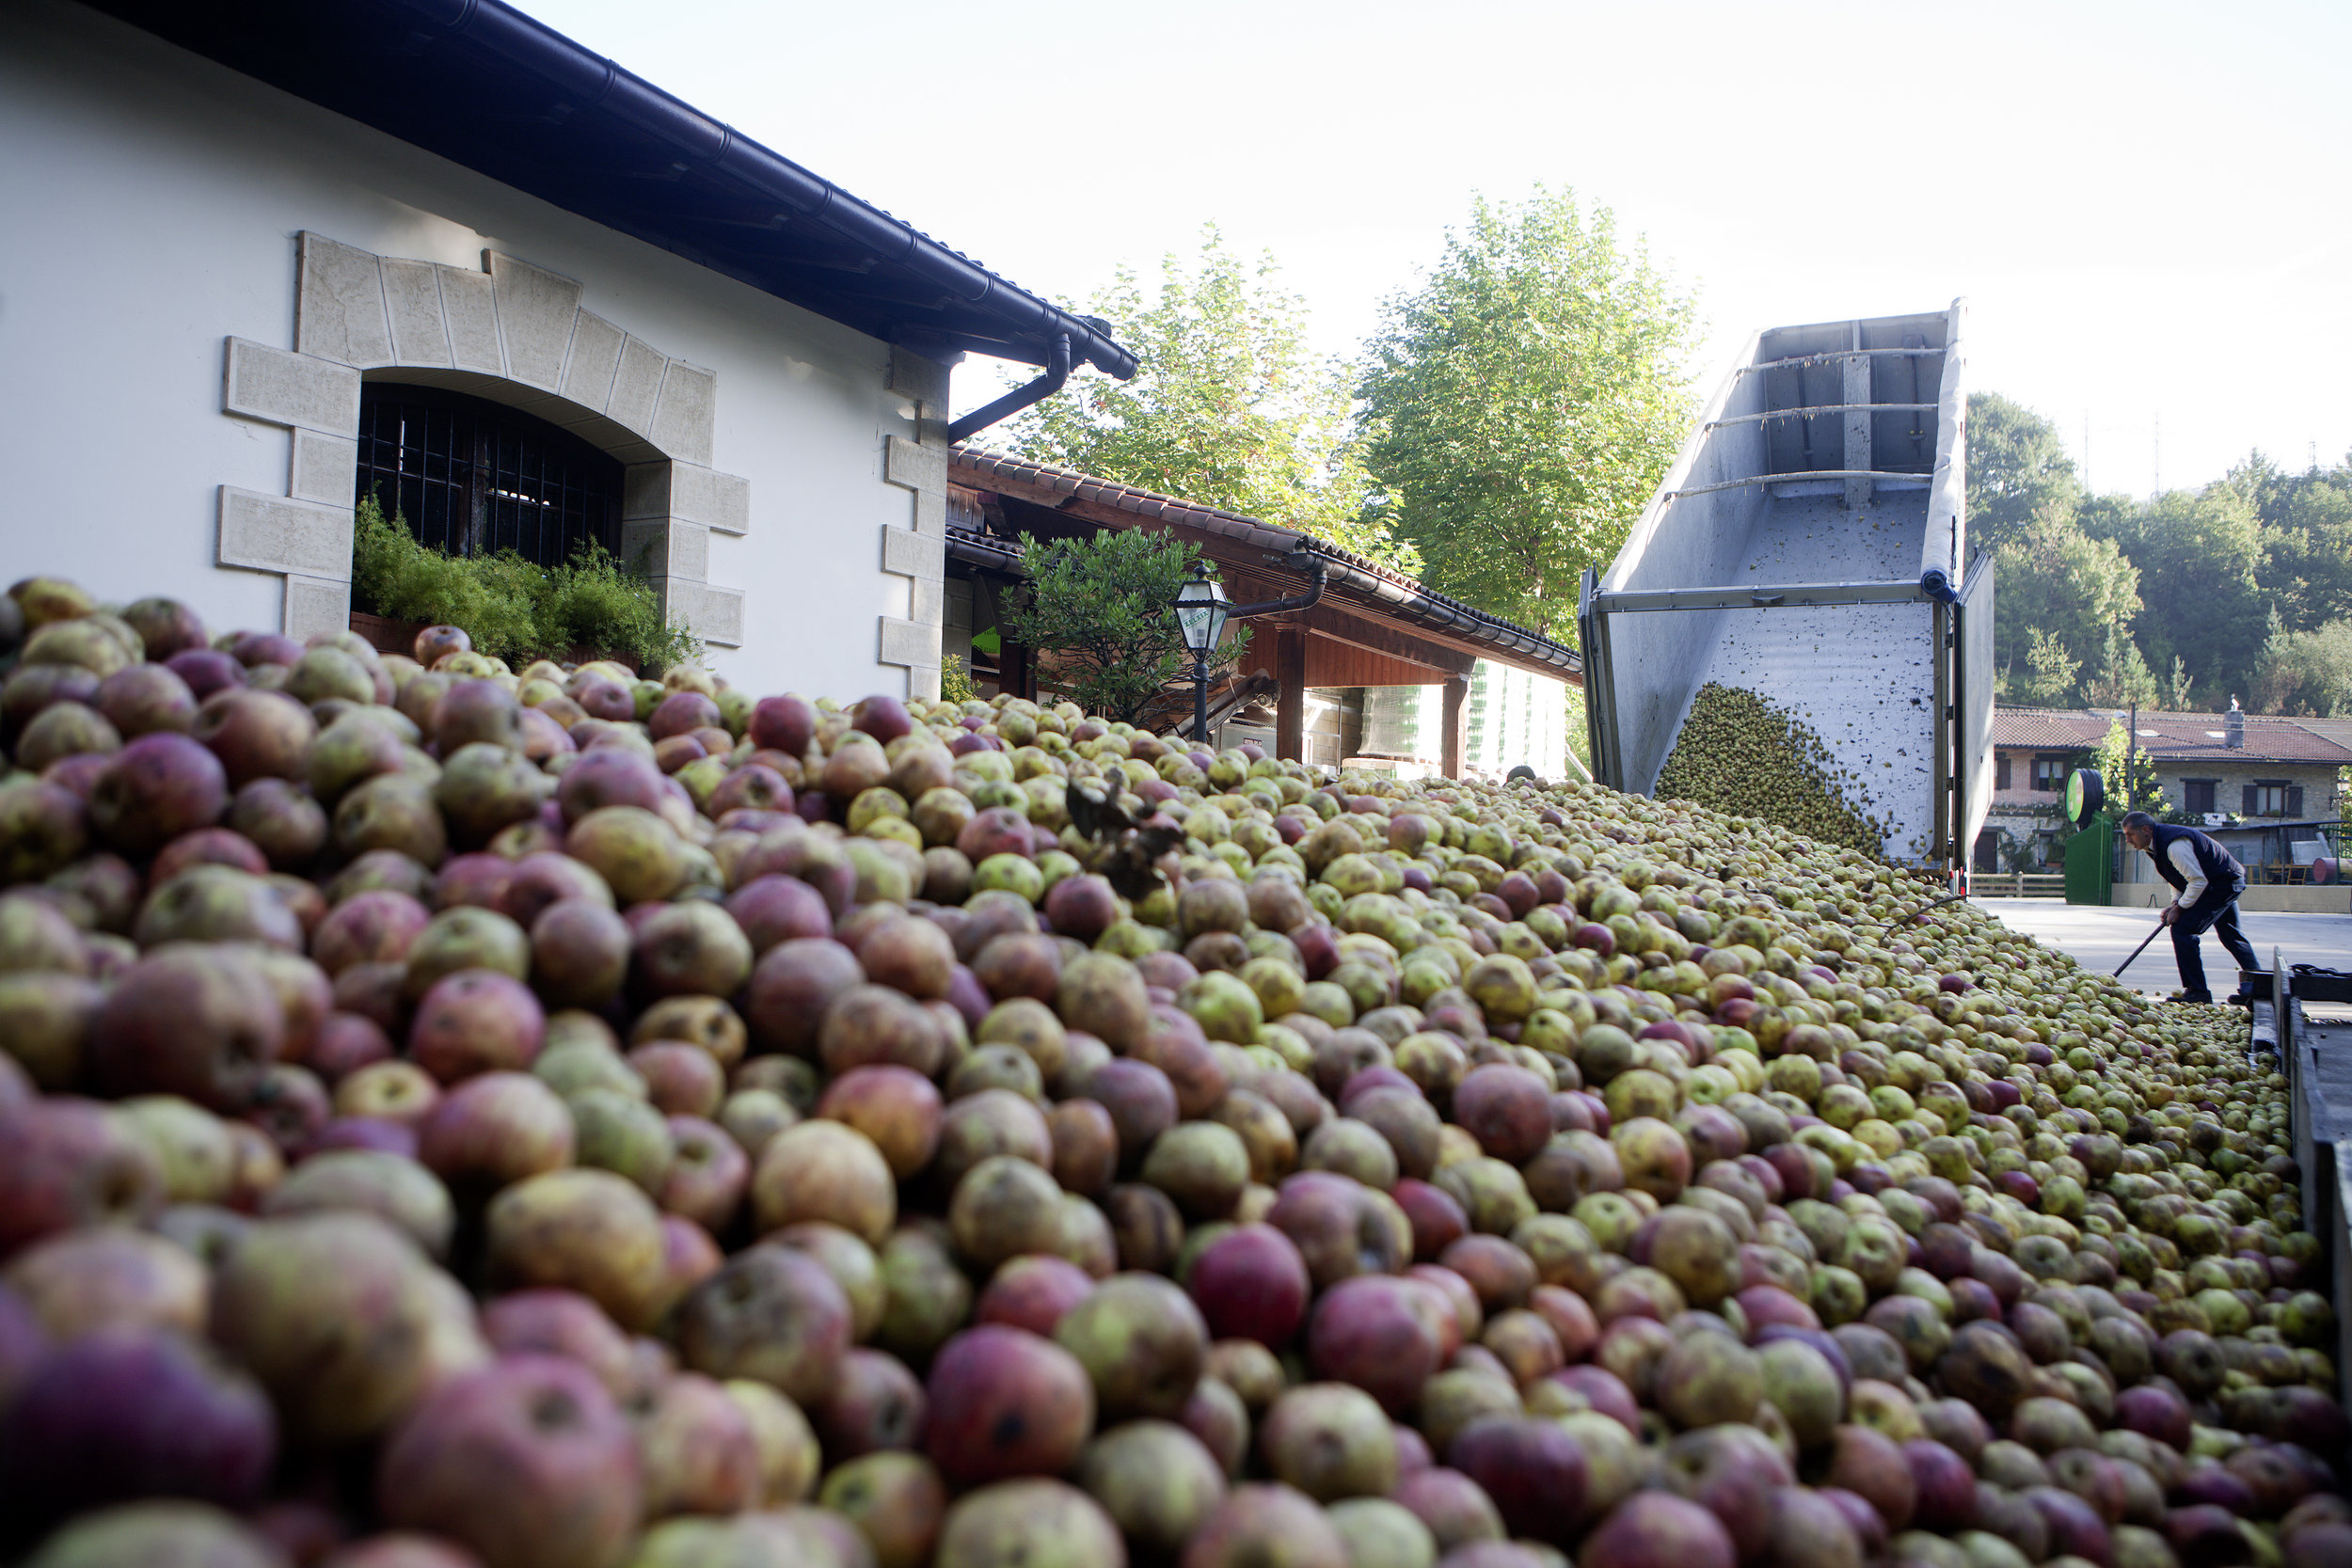 CONDÉ NAST TRAVELER: On the Cider Trail in Spain's Basque Country